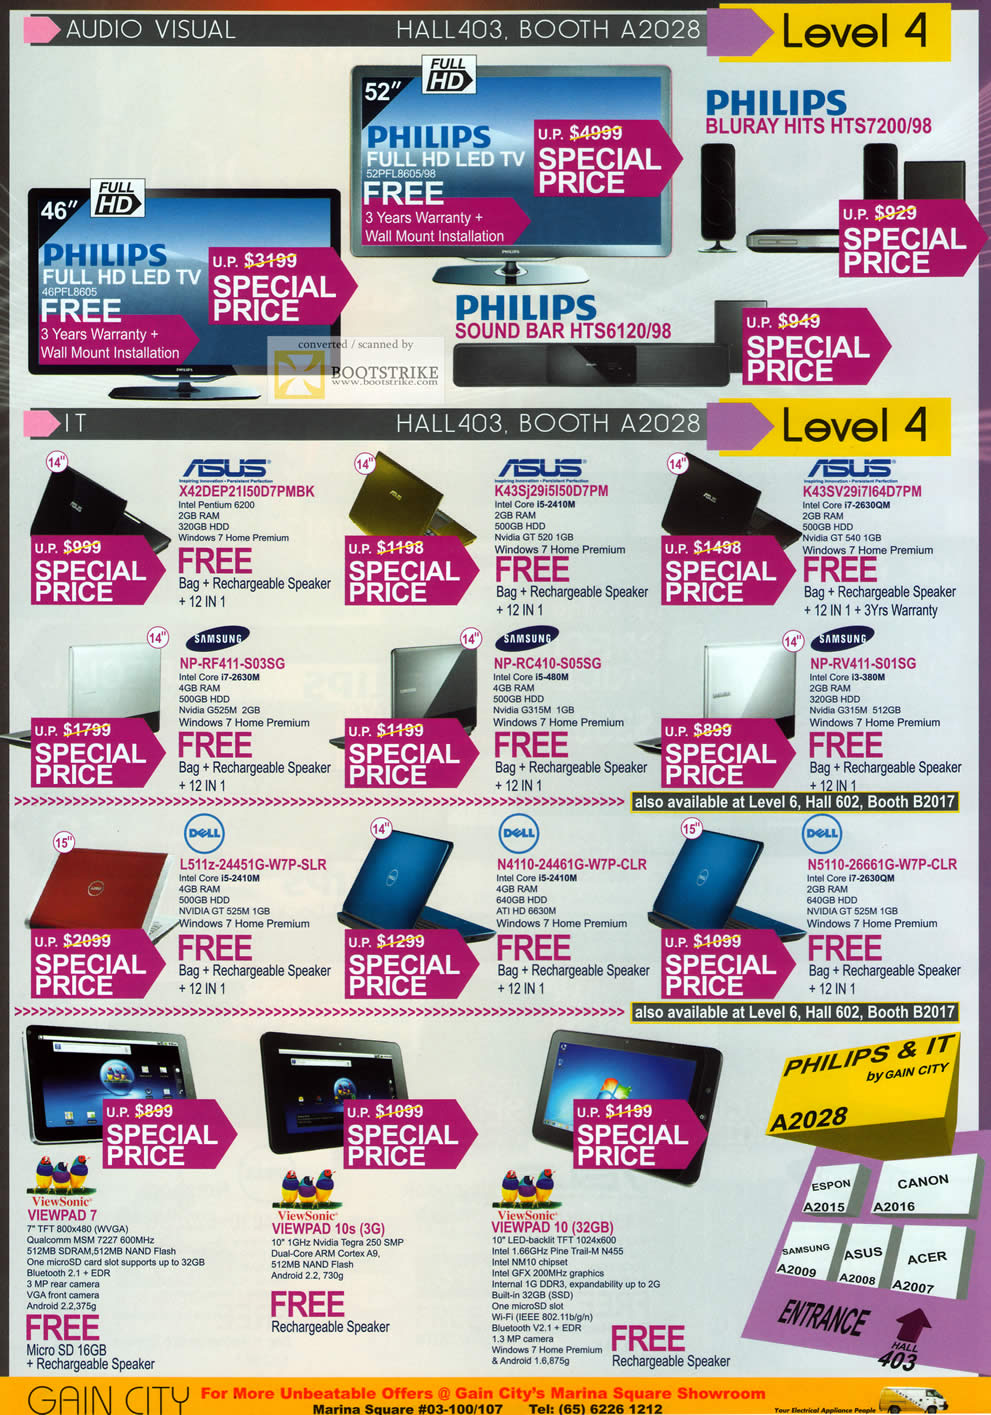 PC Show 2011 price list image brochure of Gain City Philips LED TV Blu Ray Hits Sound Bar ASUS Notebooks Samsung Dell L511z N4110 N5110 Viewsonic Viewpad 7 10s 10